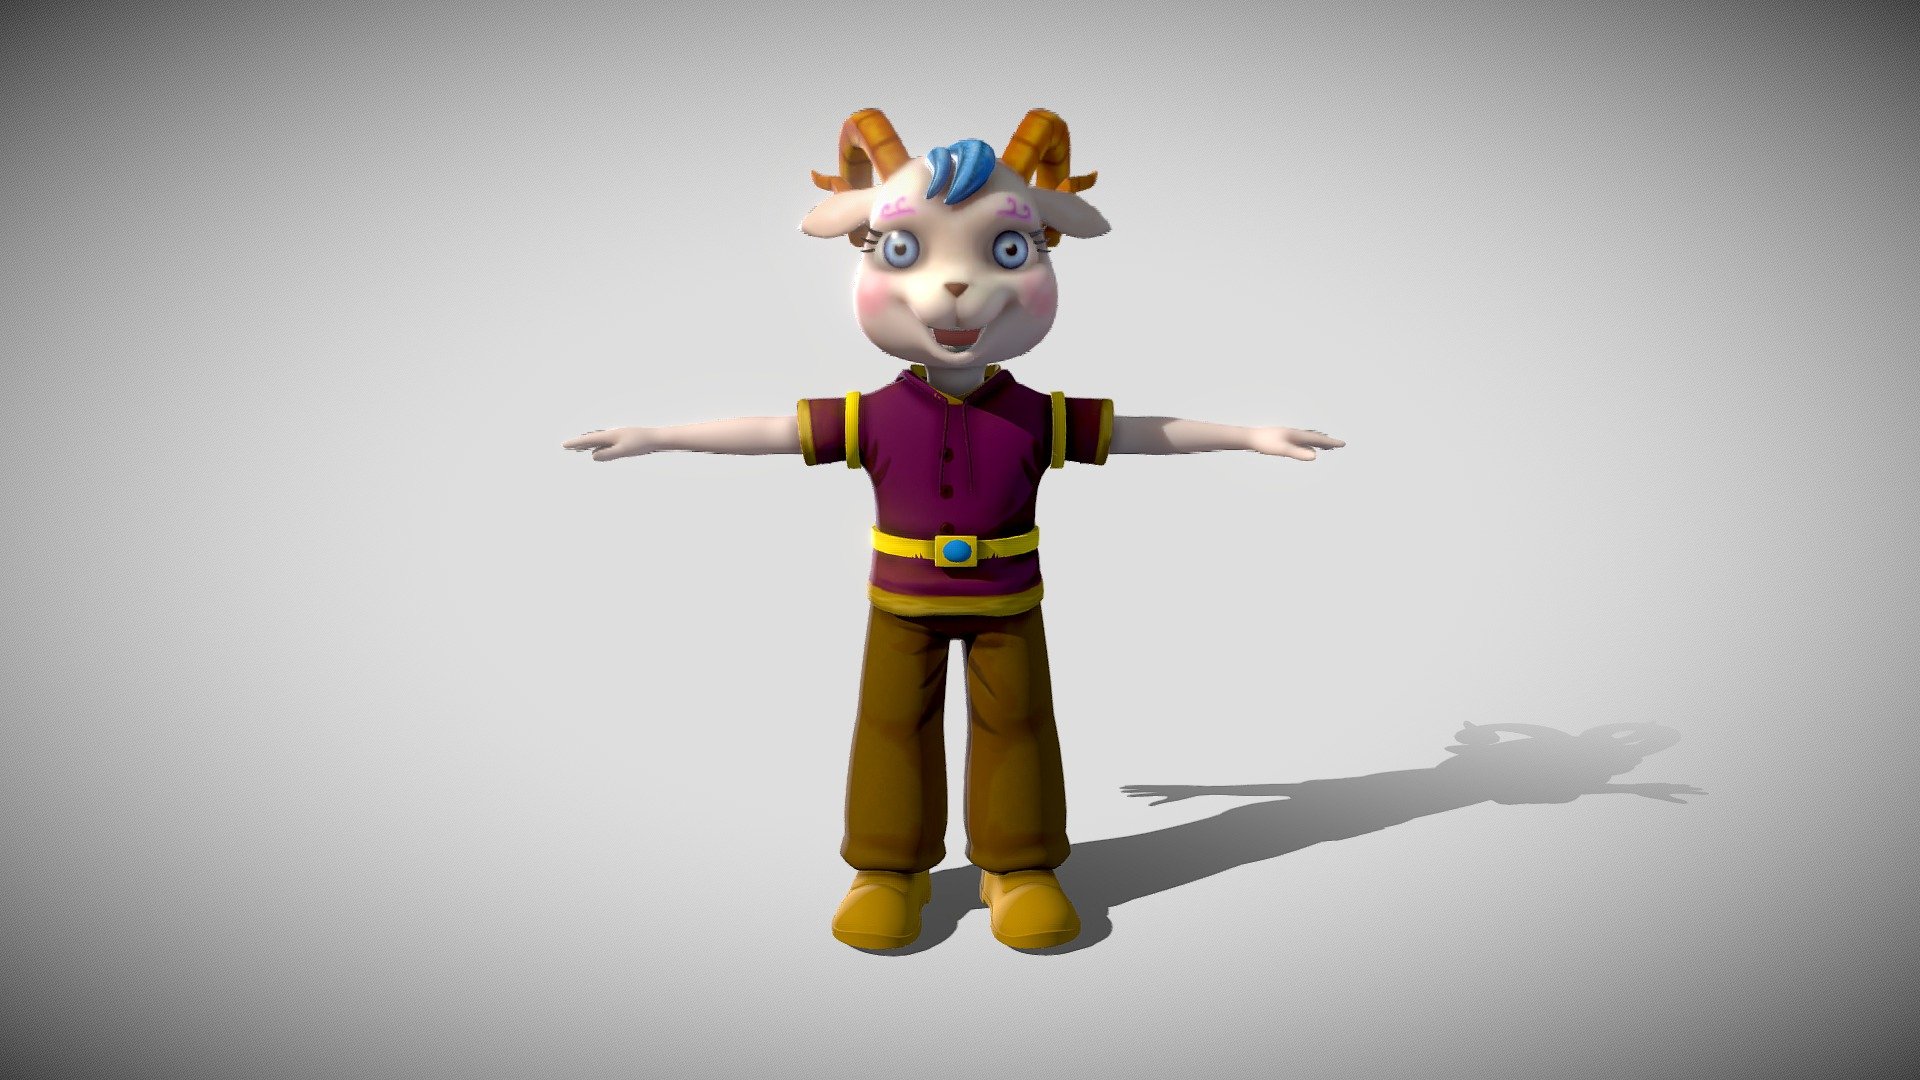 Cartoon characters, lamb a film and television animation model, texture, with binding, can transfer the picture
= = = = = = = = = = = = = = = = = = = = = = = = = = = = = = = = = = = = = = = = = = = = = = = = 
Other works ~ welcome to visit my home page - Cartoon sheep with a material binding 3D model - Buy Royalty Free 3D model by mpc199075 3d model